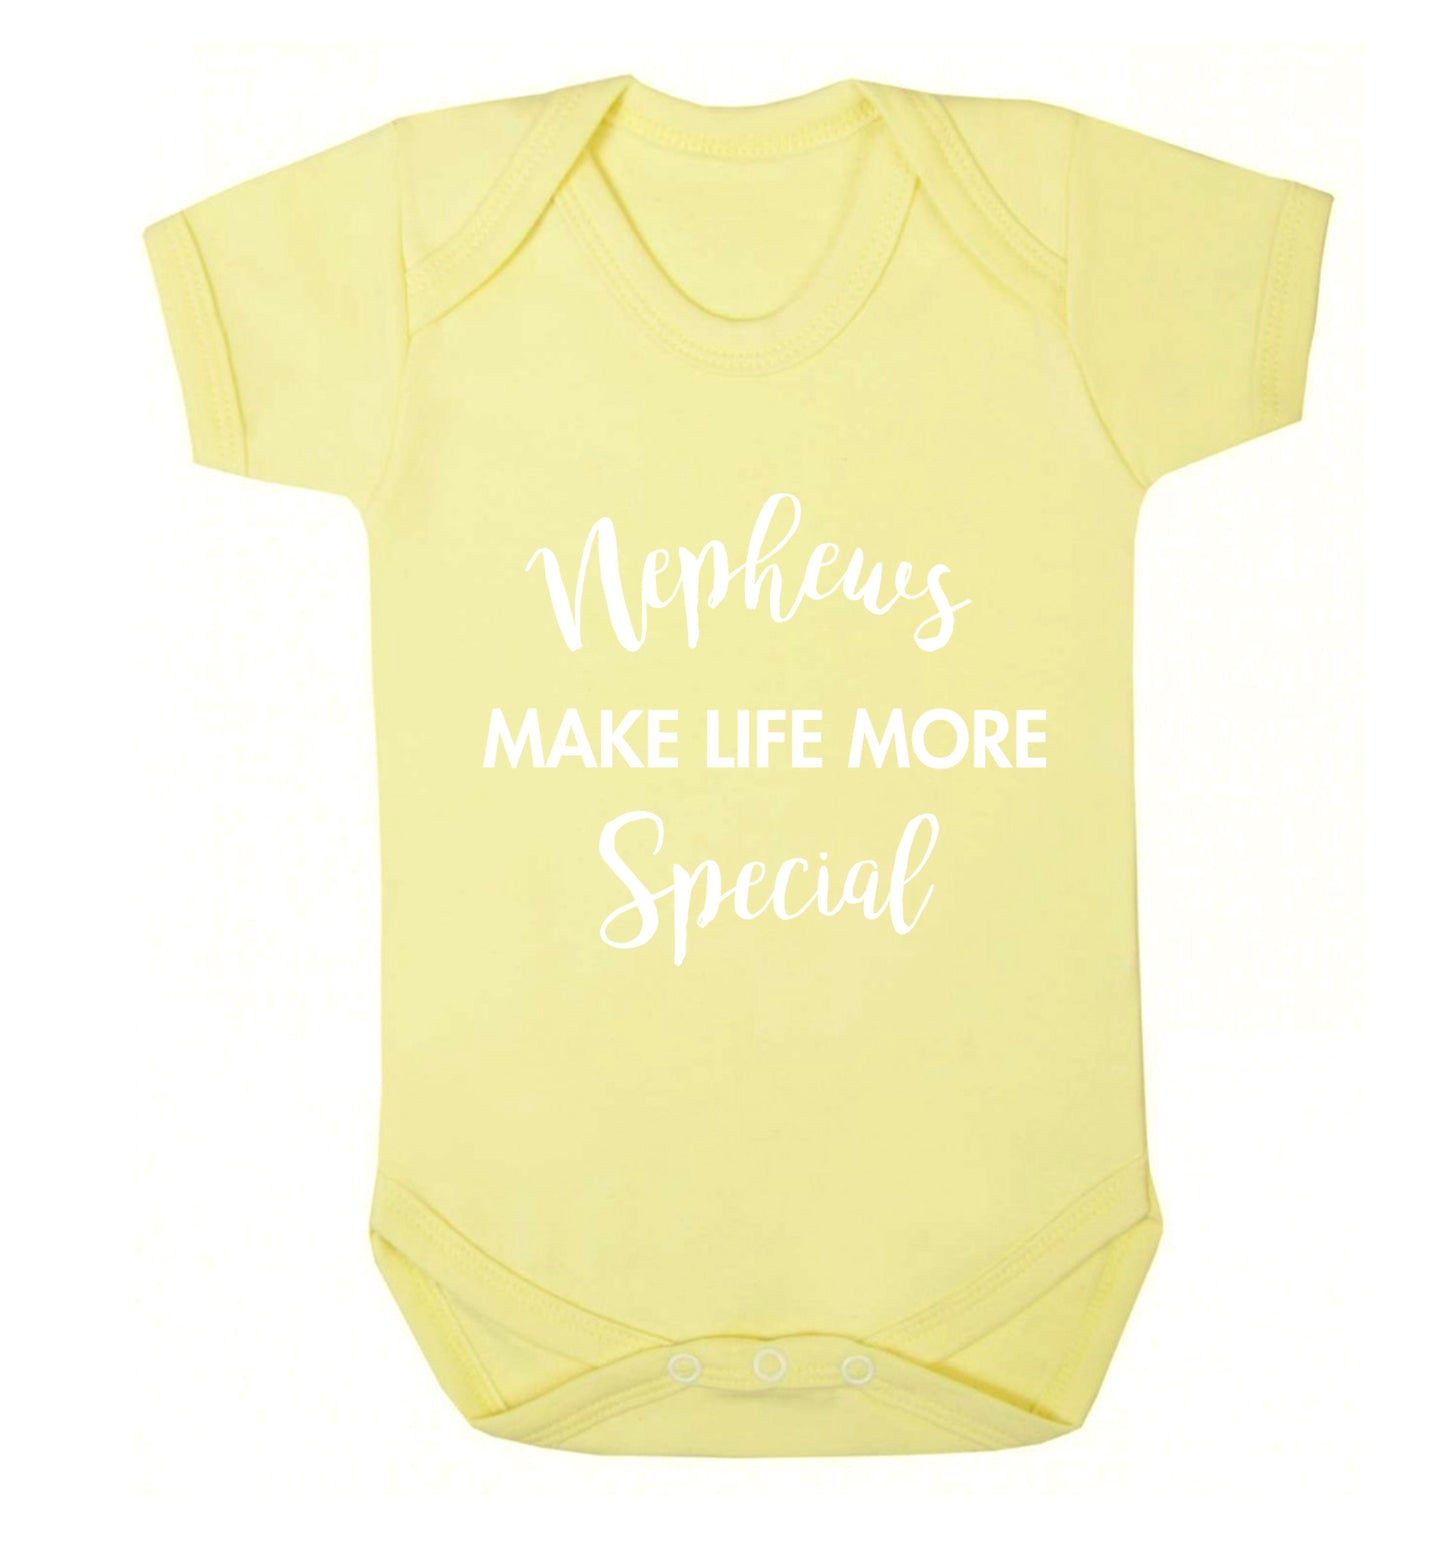 Nephews make life more special Baby Vest pale yellow 18-24 months